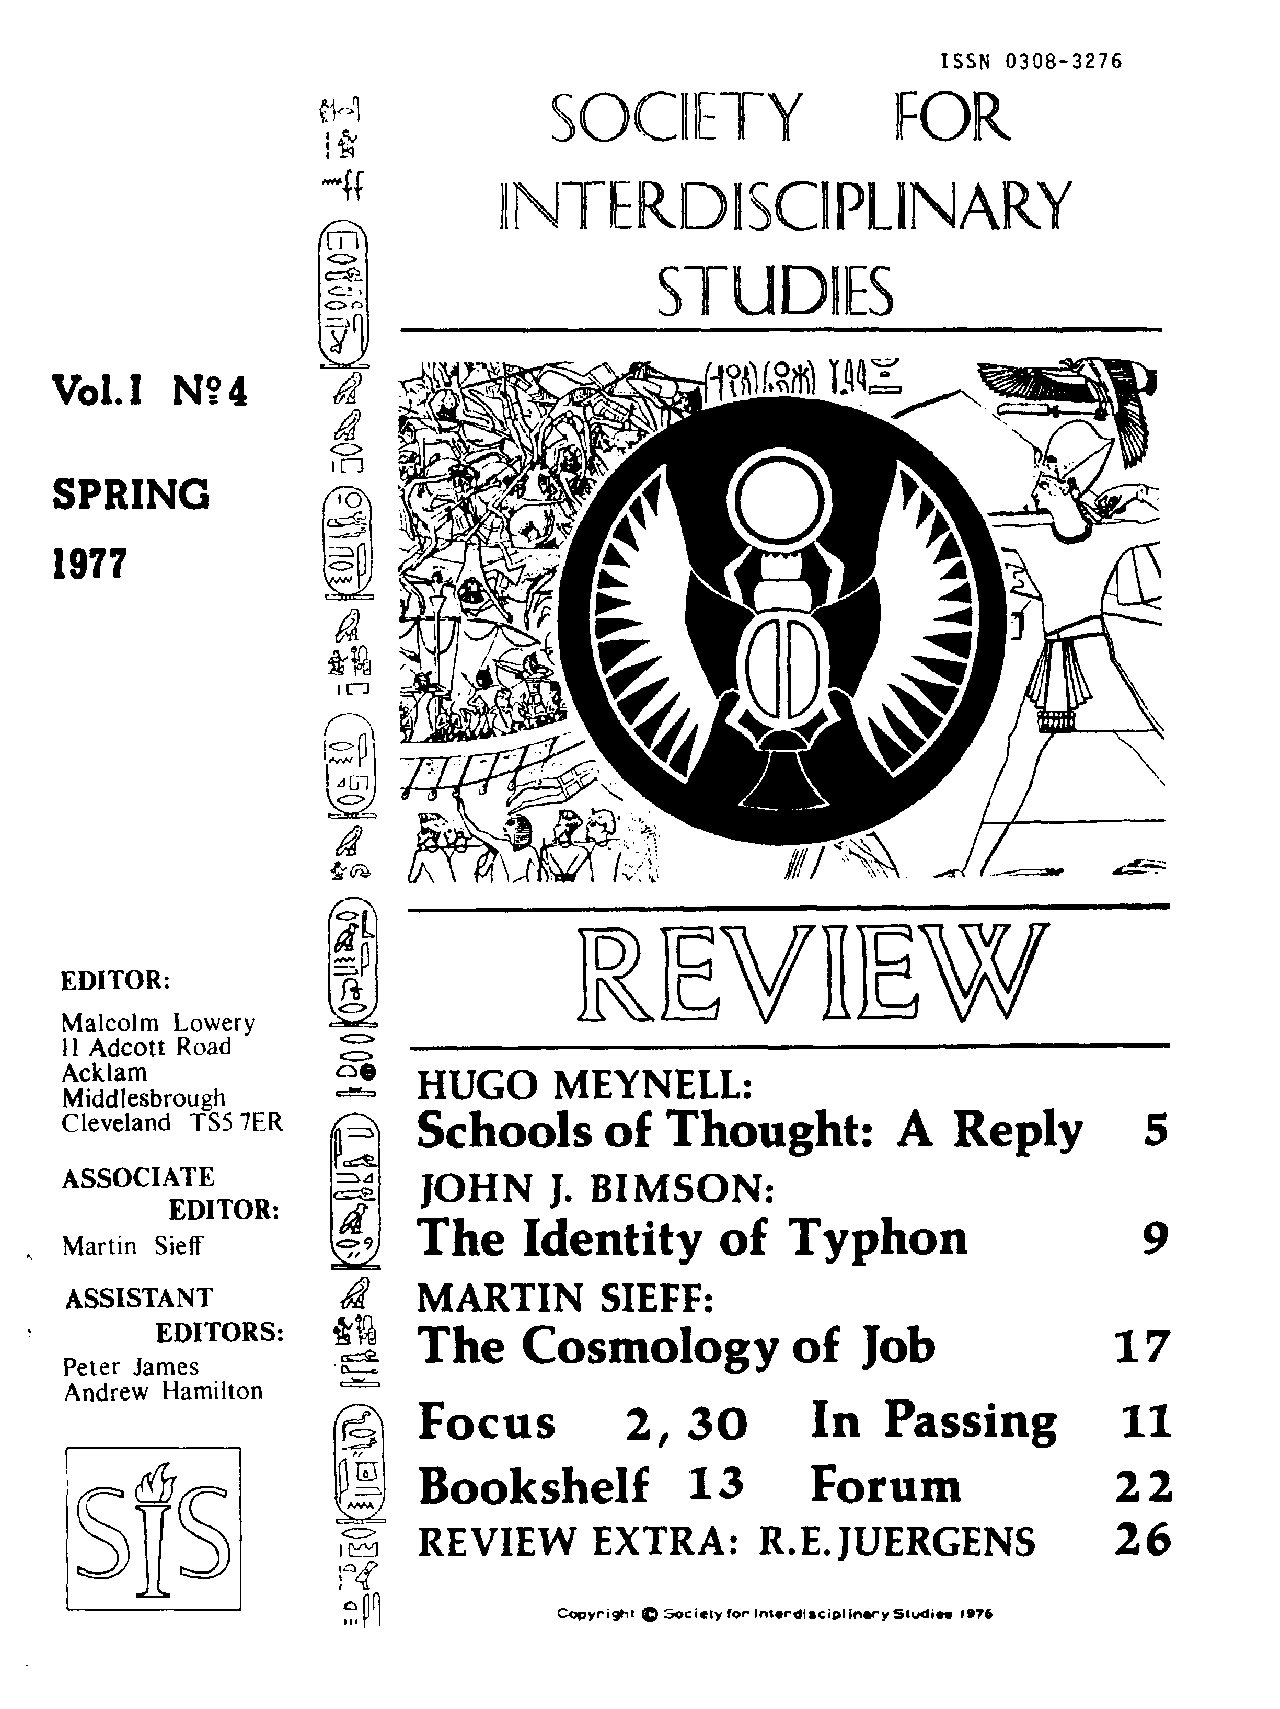 SIS Review 1977 v1 n4 cover